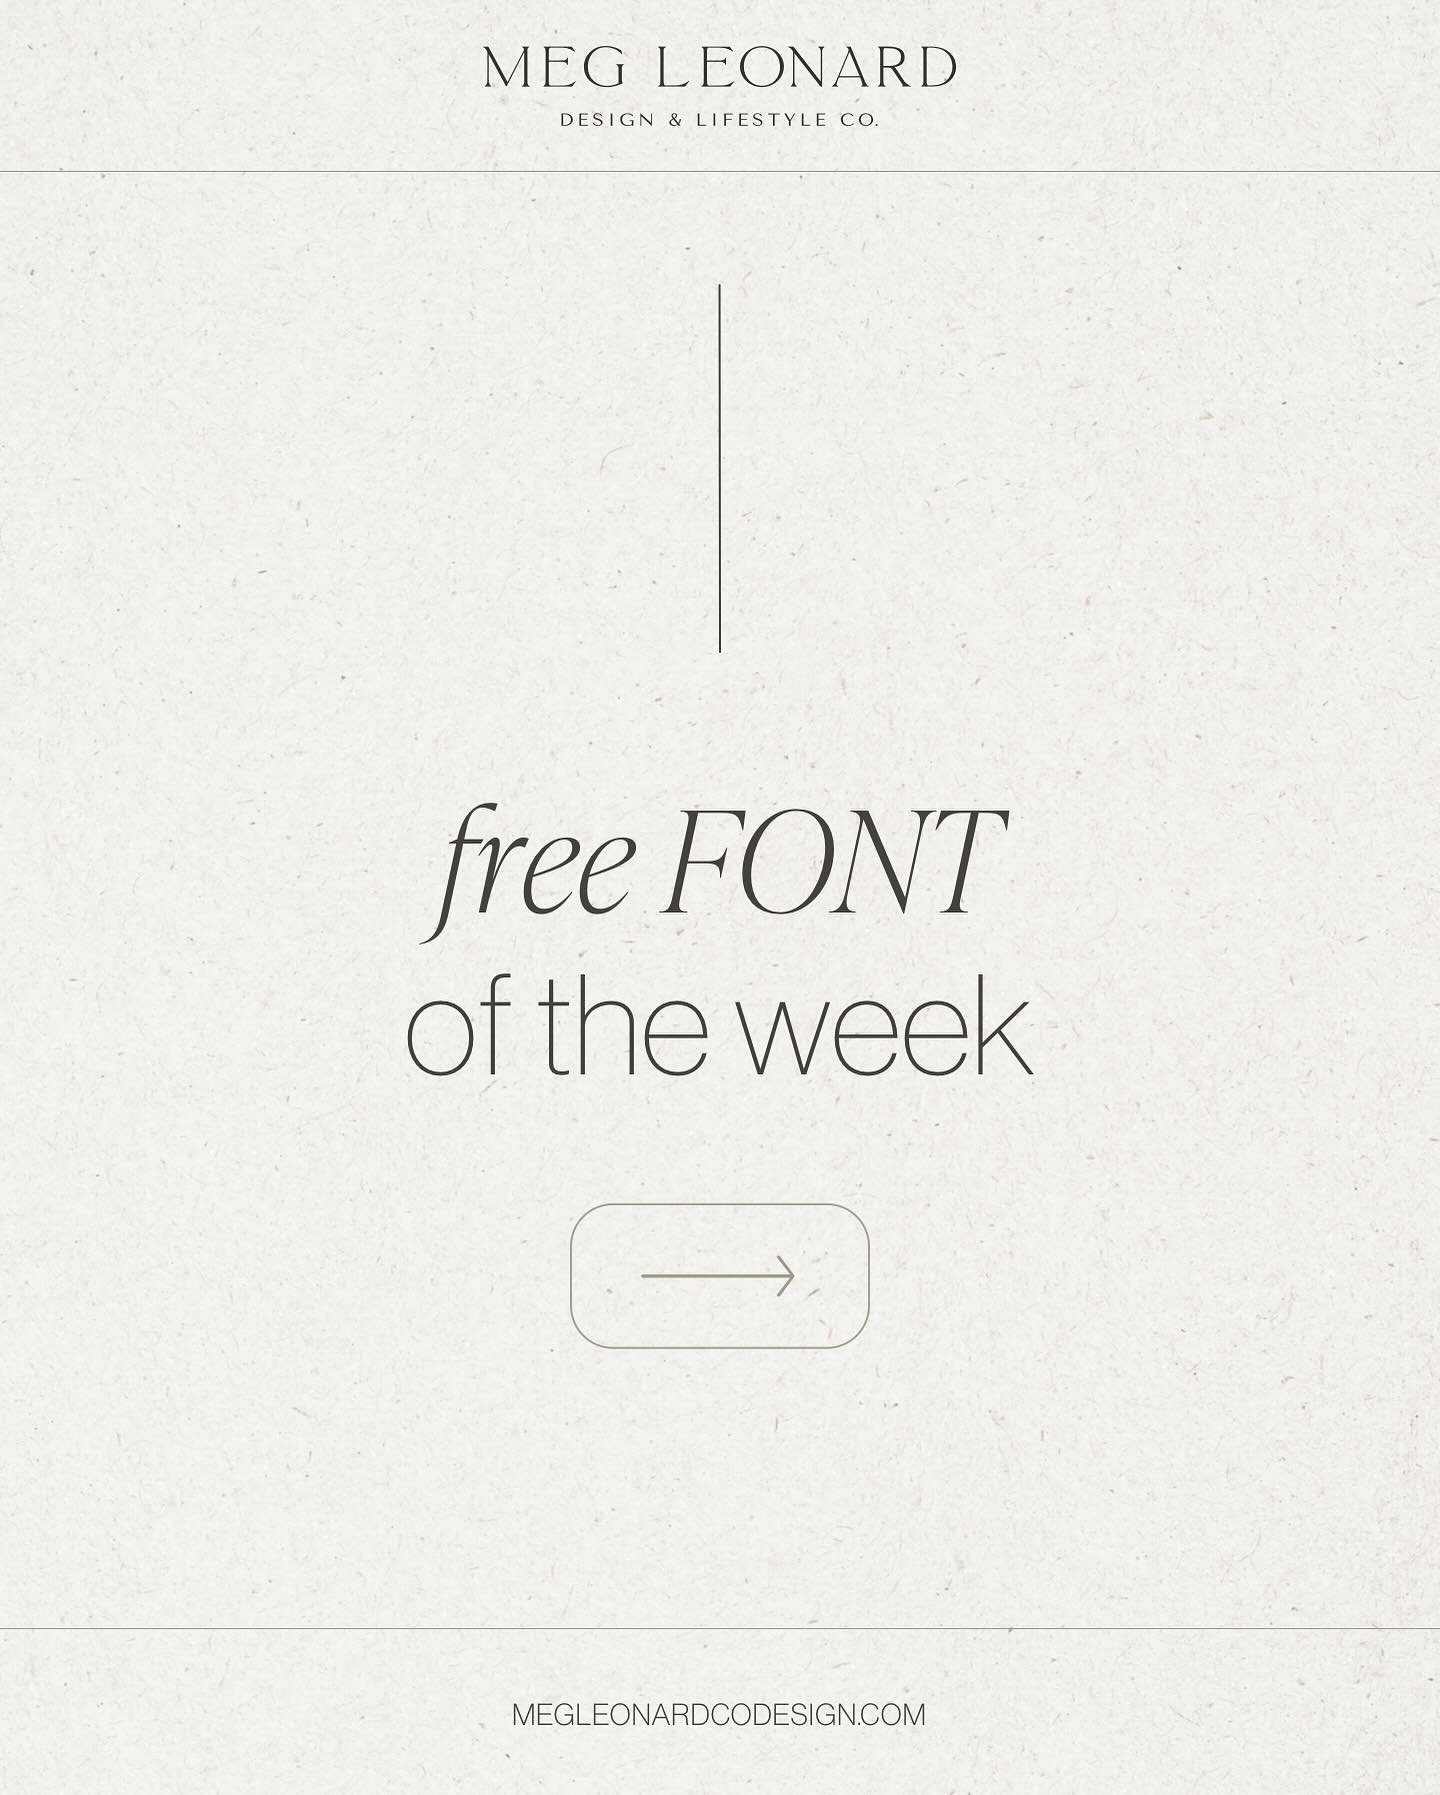 Free font of the week &rarr;

This near hand lettered serif font is the perfect blend of classic, yet trending, to serve as a potential accent style to give character to communication. Get it today for free via Google fonts ✨
&bull;
&bull;
&bull;

#p